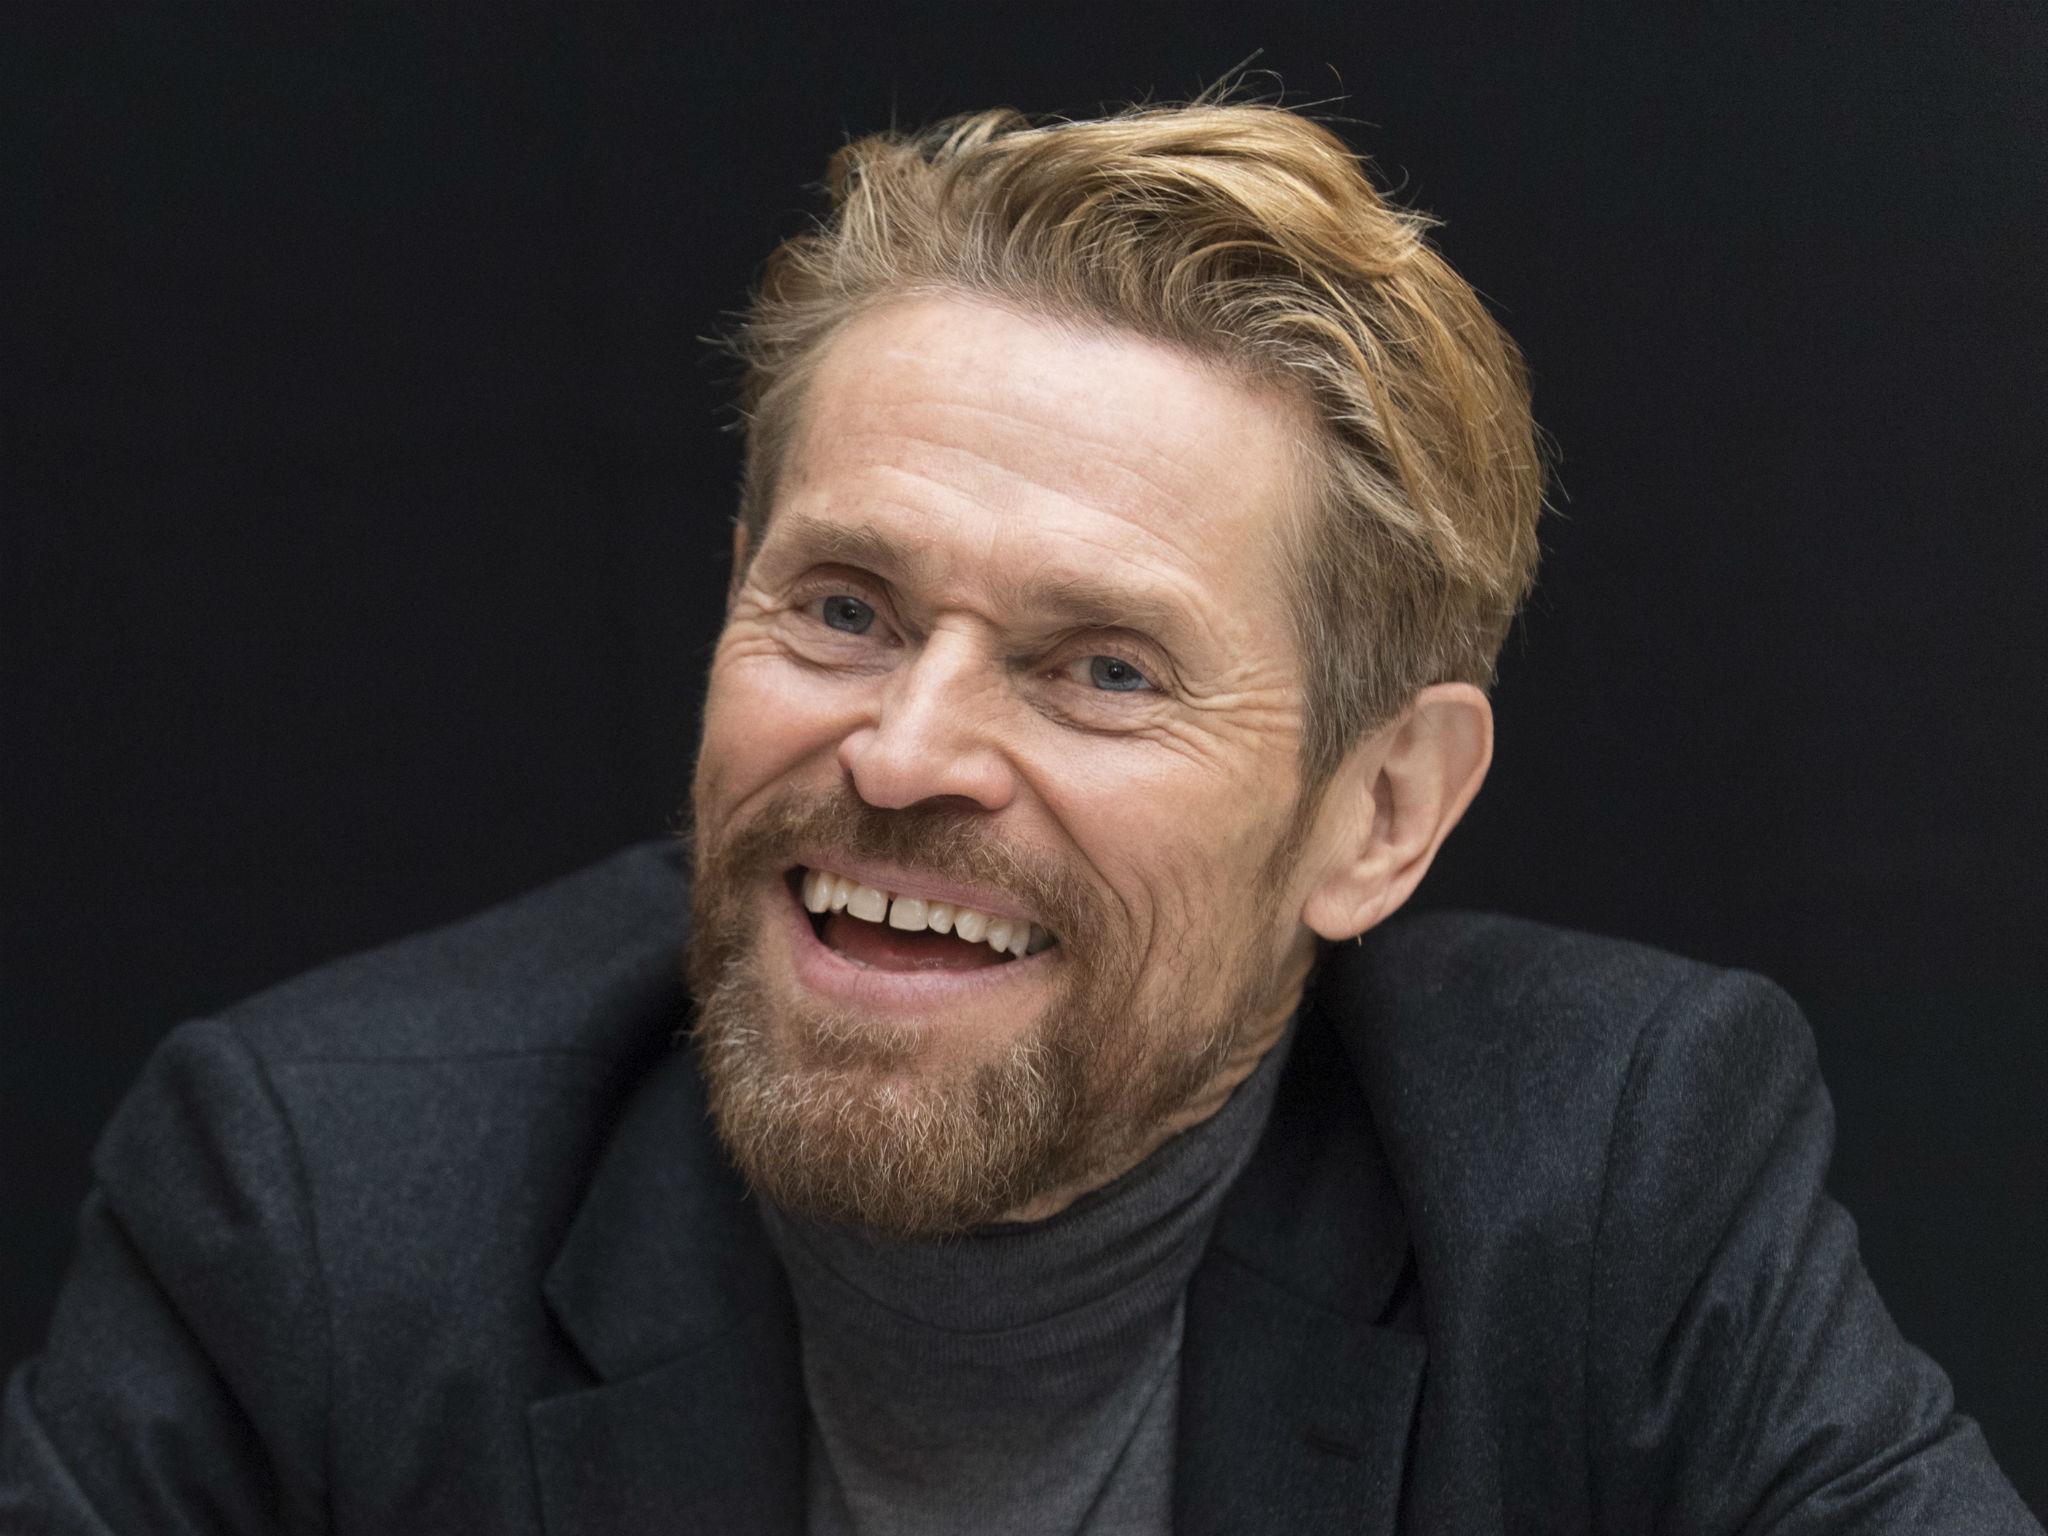 willem-dafoe-interview-i-don-t-want-people-to-know-who-i-am-the